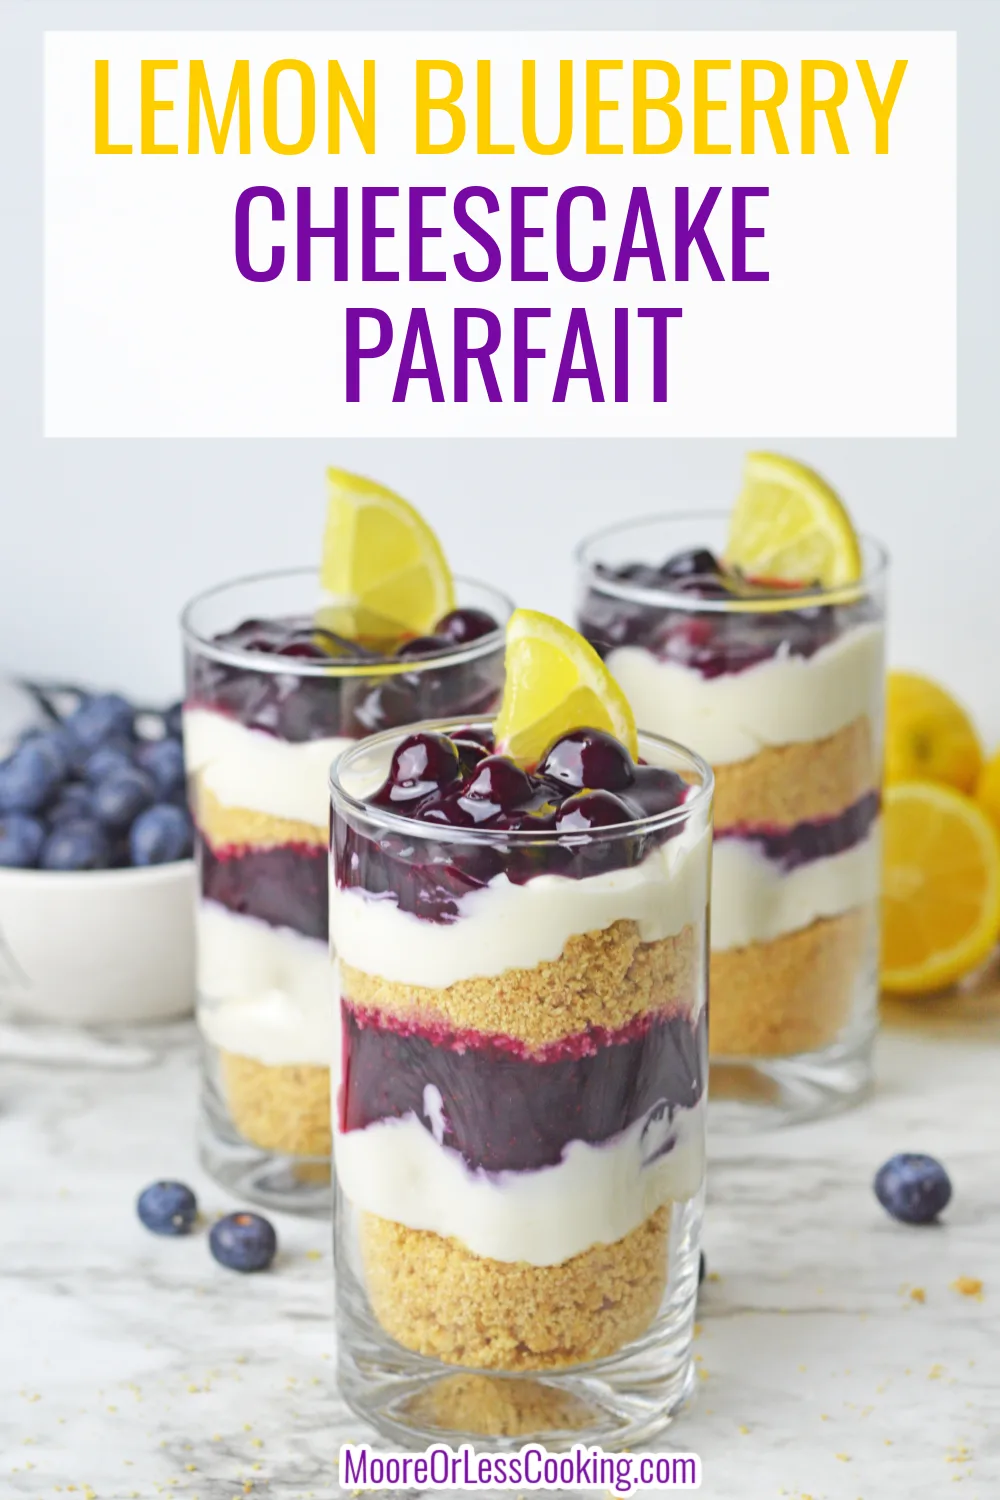 This Lemon Blueberry Cheesecake Parfait is an easy no-bake summer dessert that's always a hit. It has all the flavors of cheesecake including buttery graham cracker layers to separate the sweetened lemon cream cheese mixture that's topped with an easy homemade blueberry sauce and garnished with lemon. via @Mooreorlesscook